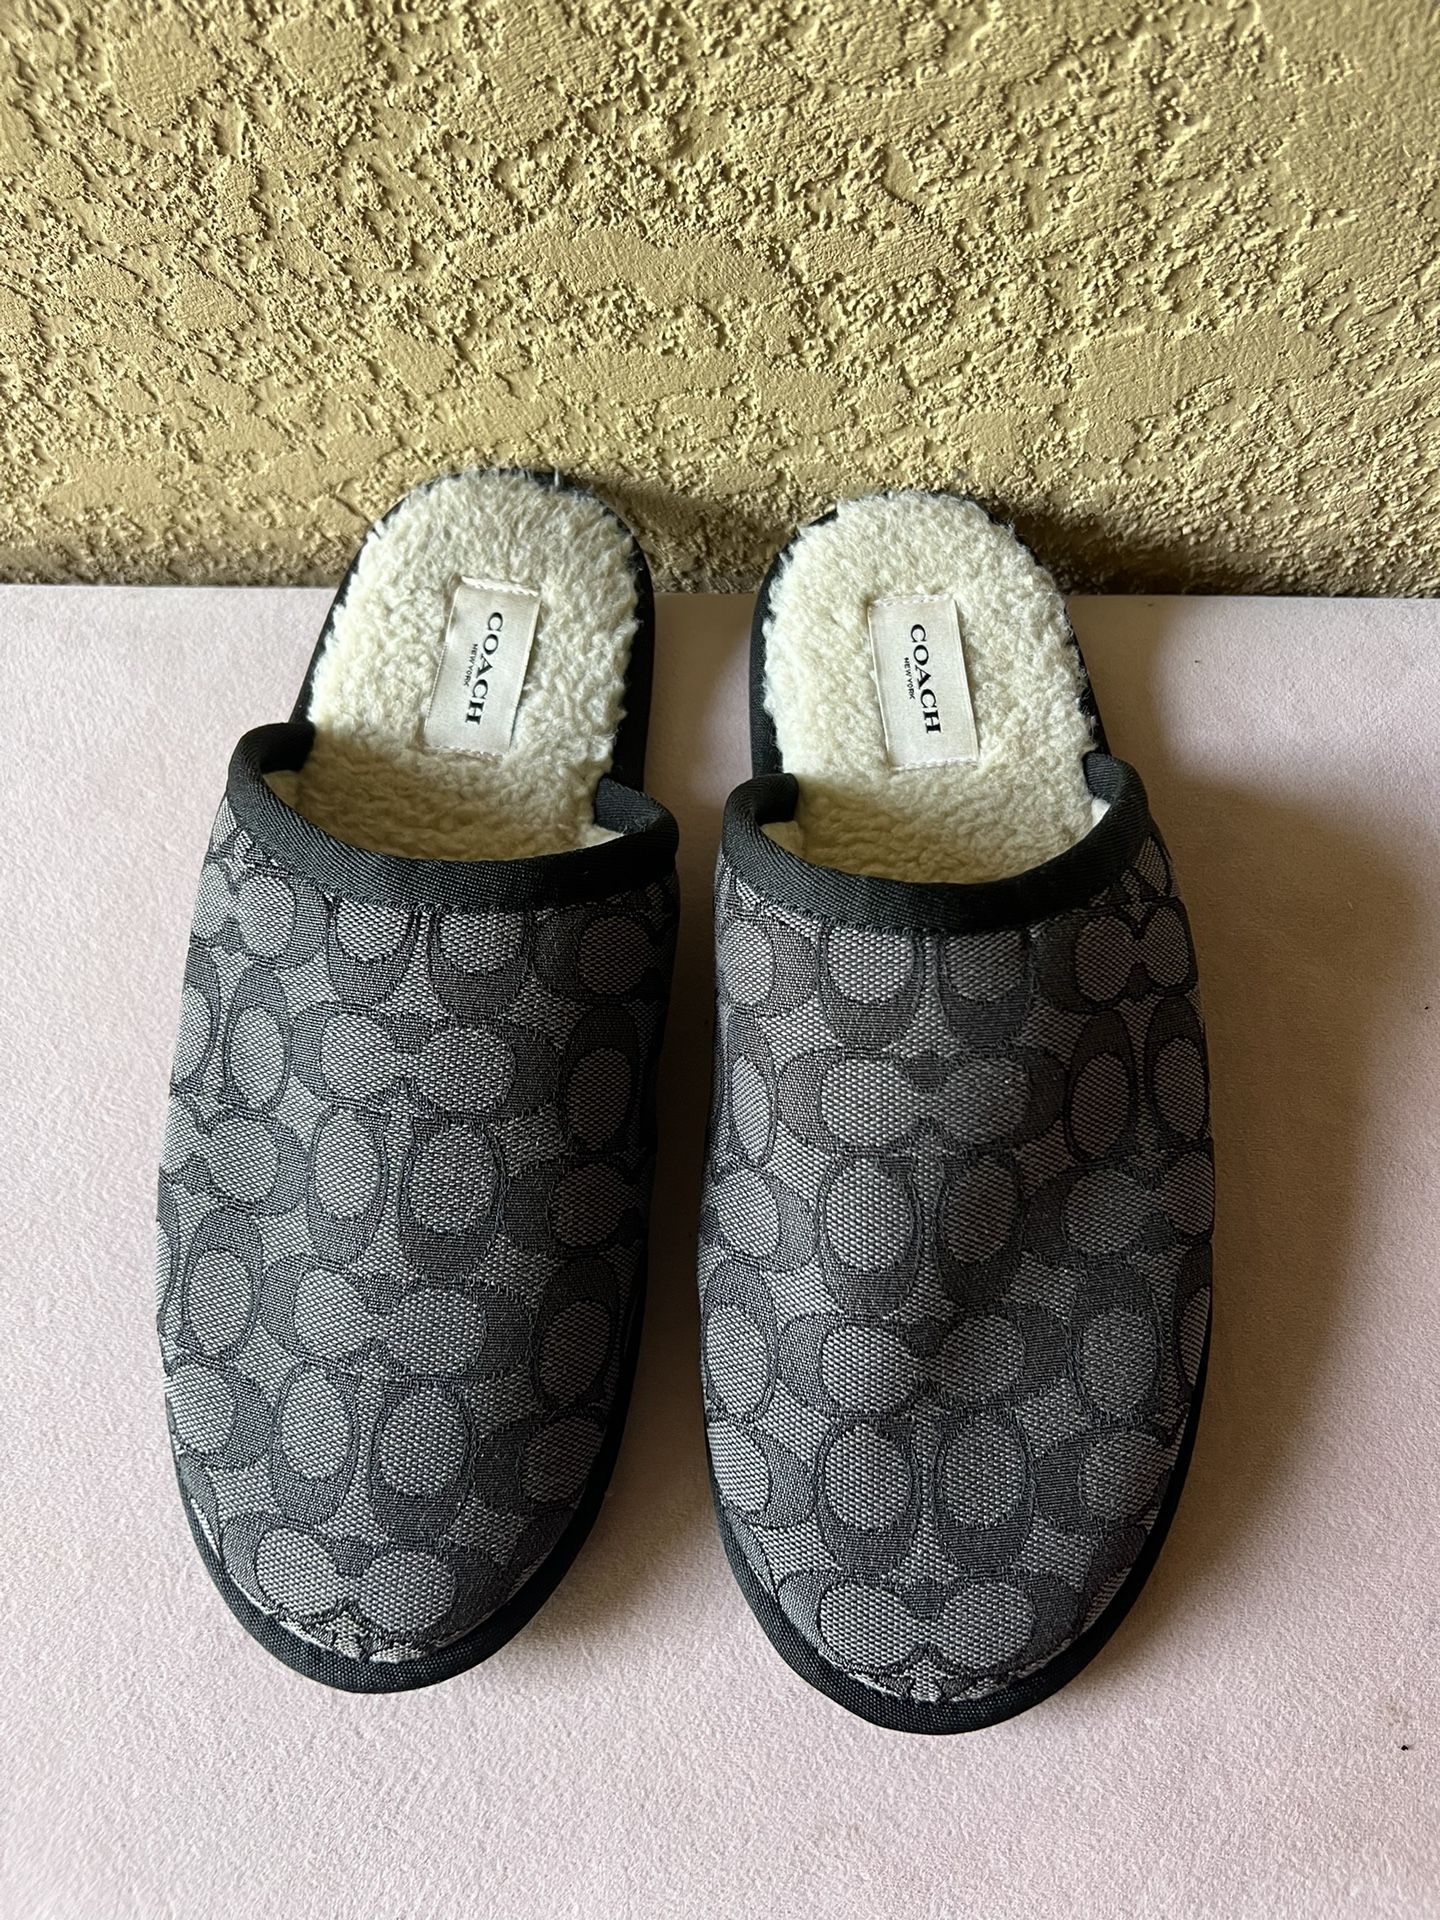 Coach slippers